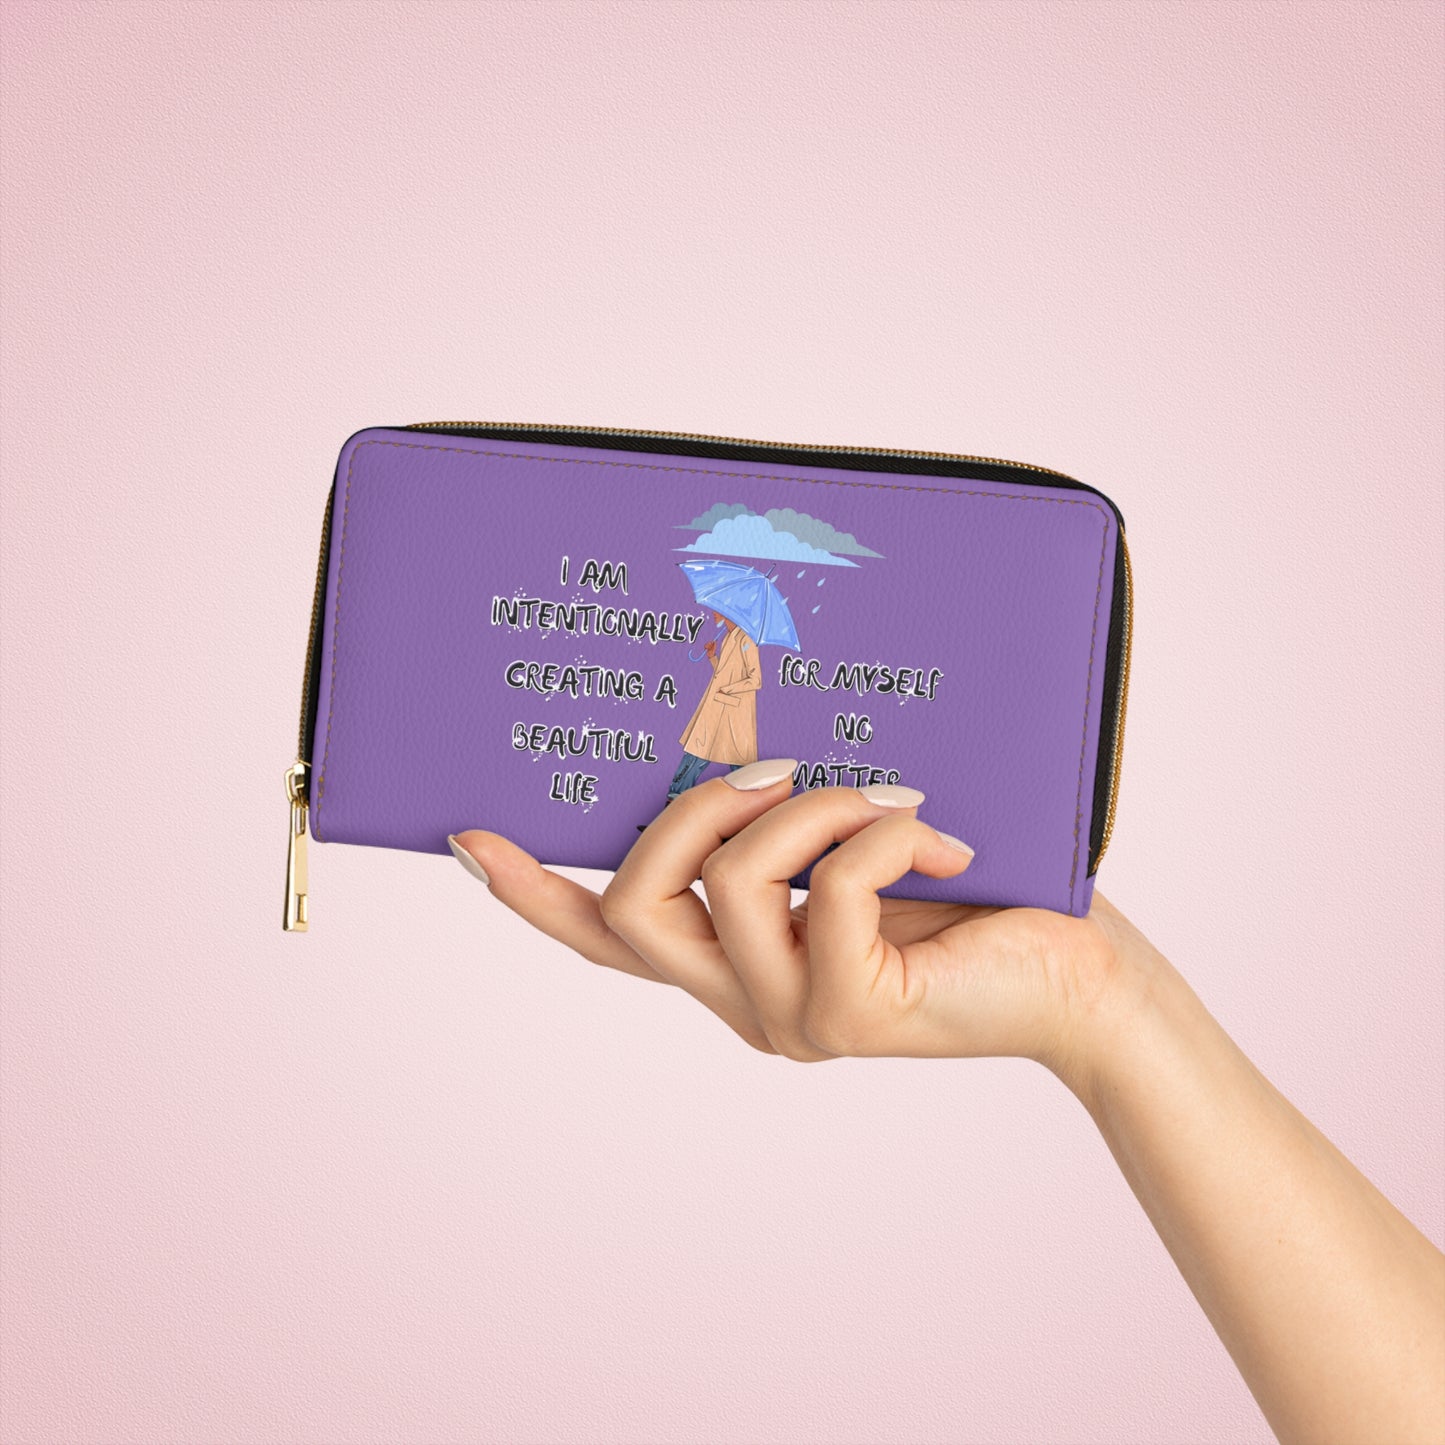 "I AM Intentionally Creating A Beautiful Life"- Positive Afrocentric Affirmation Vegan Leather Wallet Bag- Empower Your Style and Self-Love' ; Purple Wallet